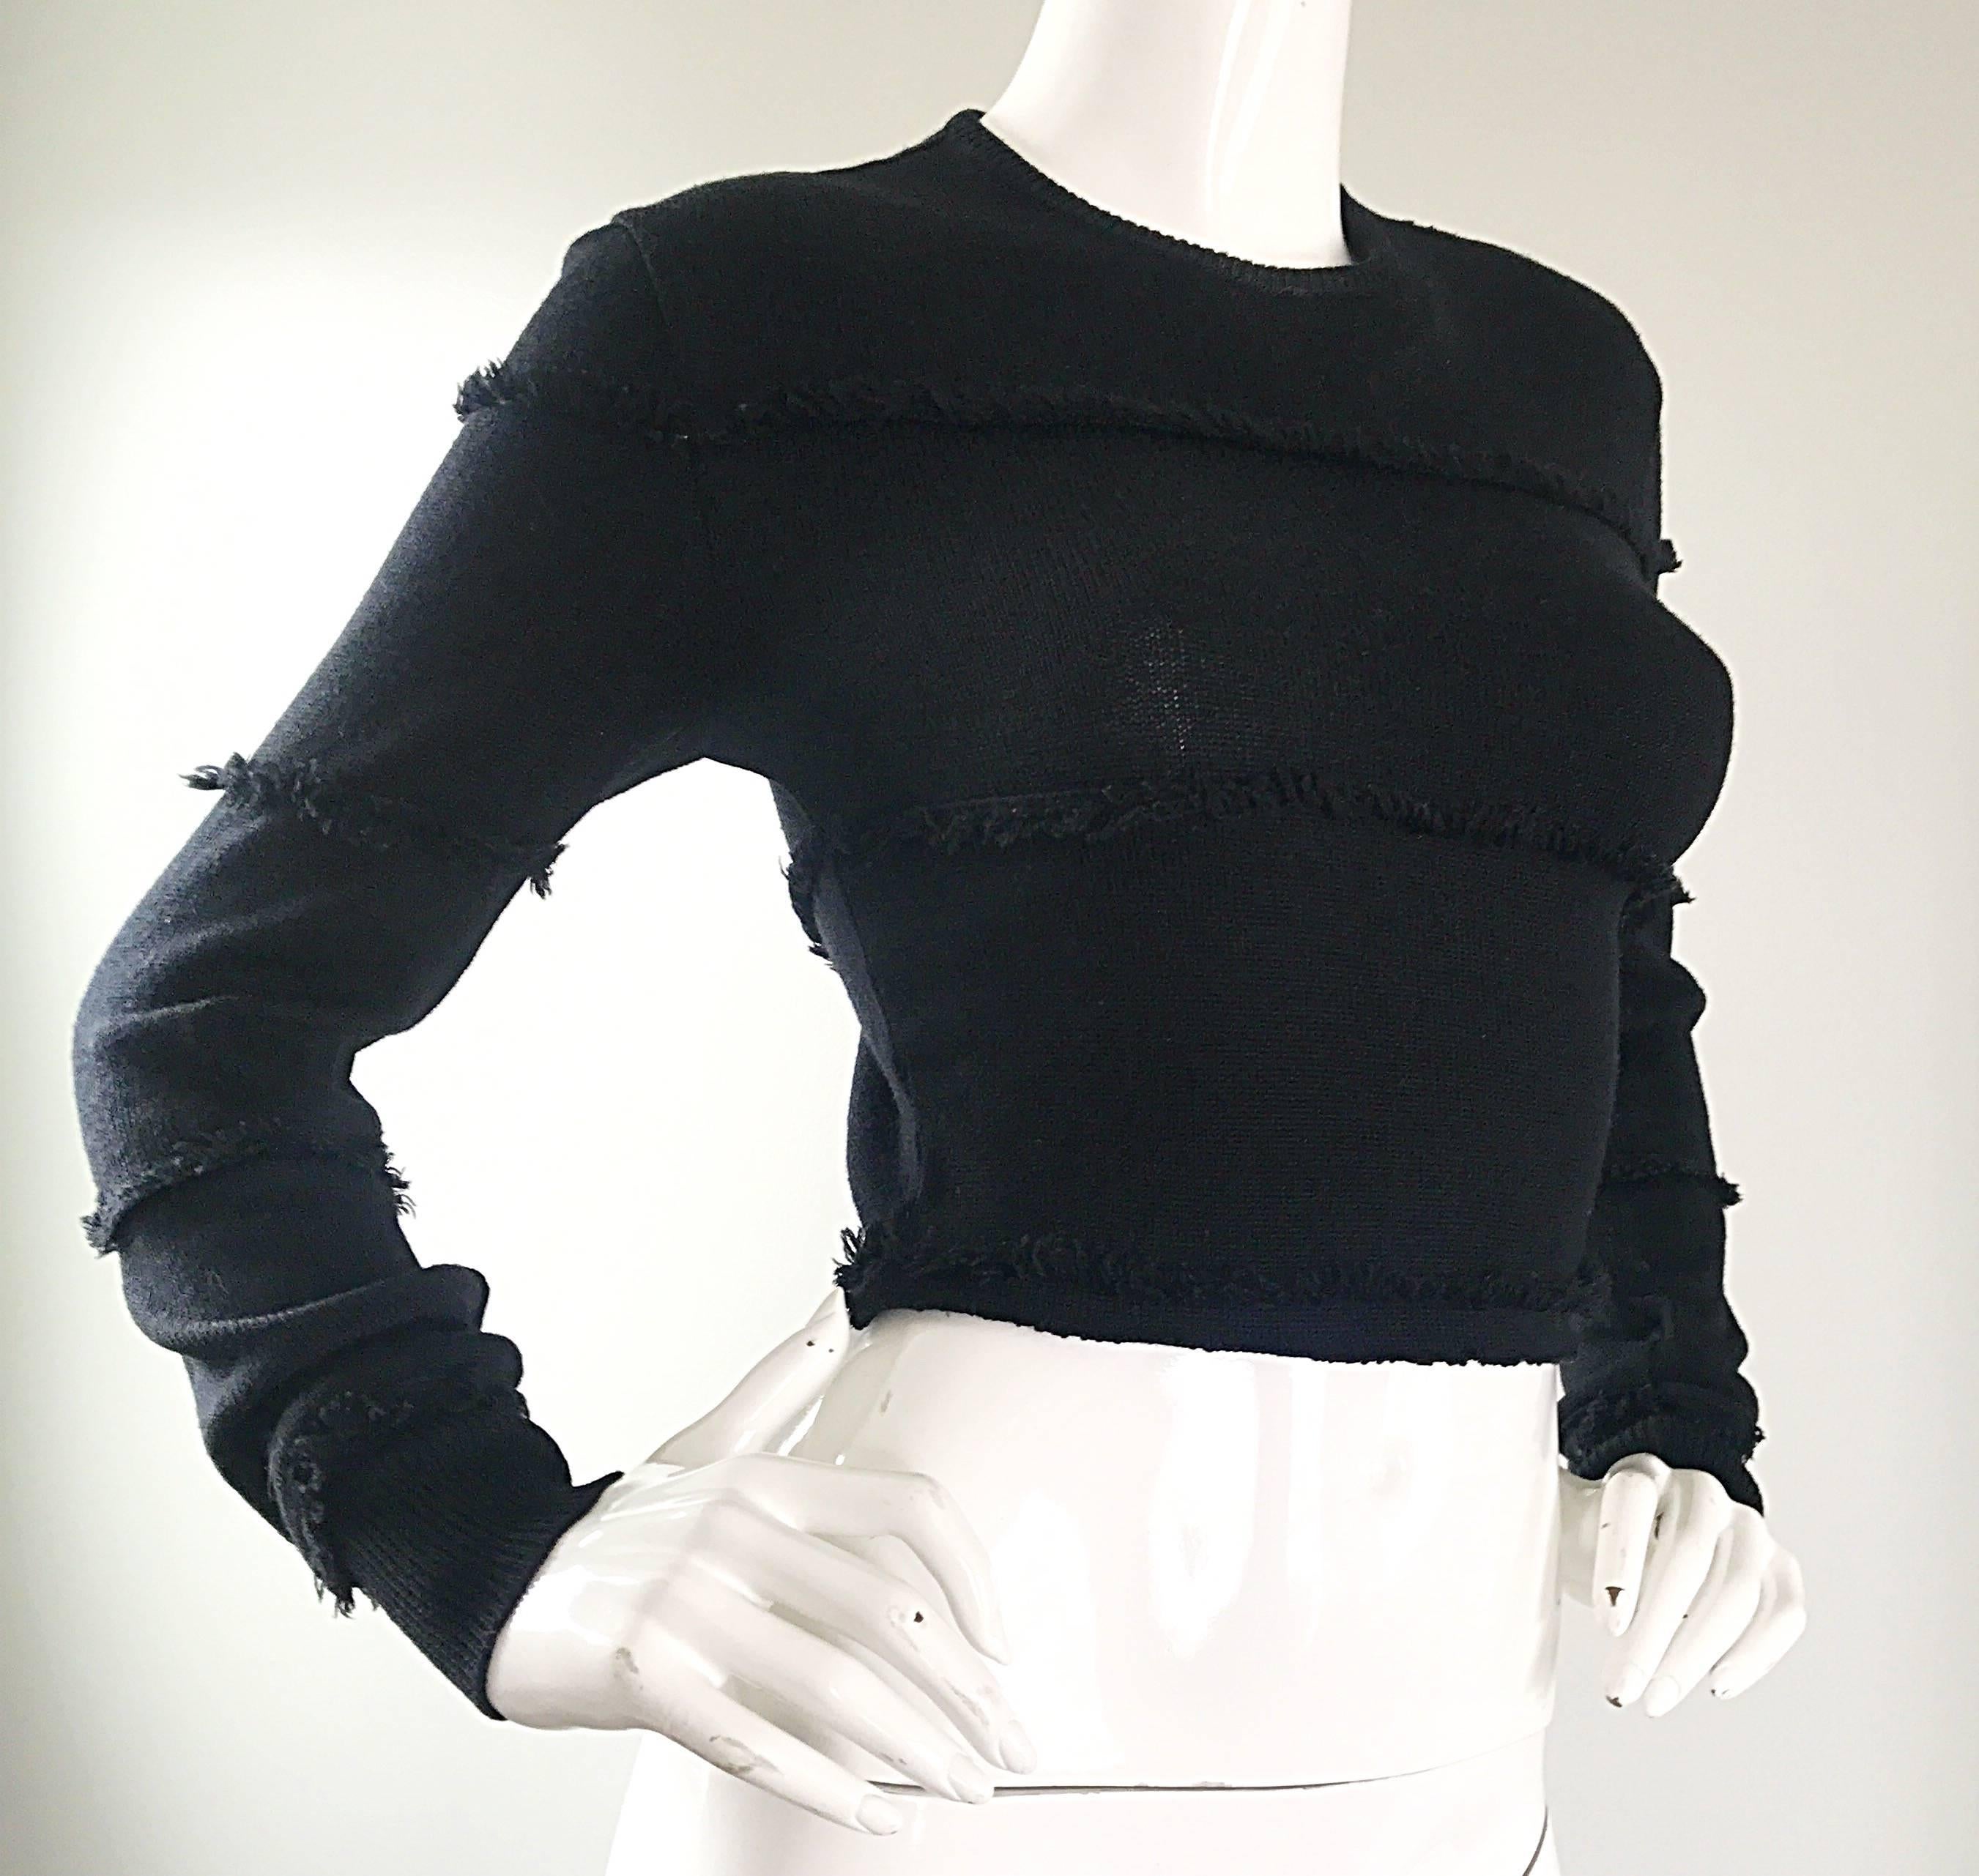 Women's Early Gianni Versace 1980s Sexy Black Fringe 80s Vintage Cotton Sweater Crop Top For Sale